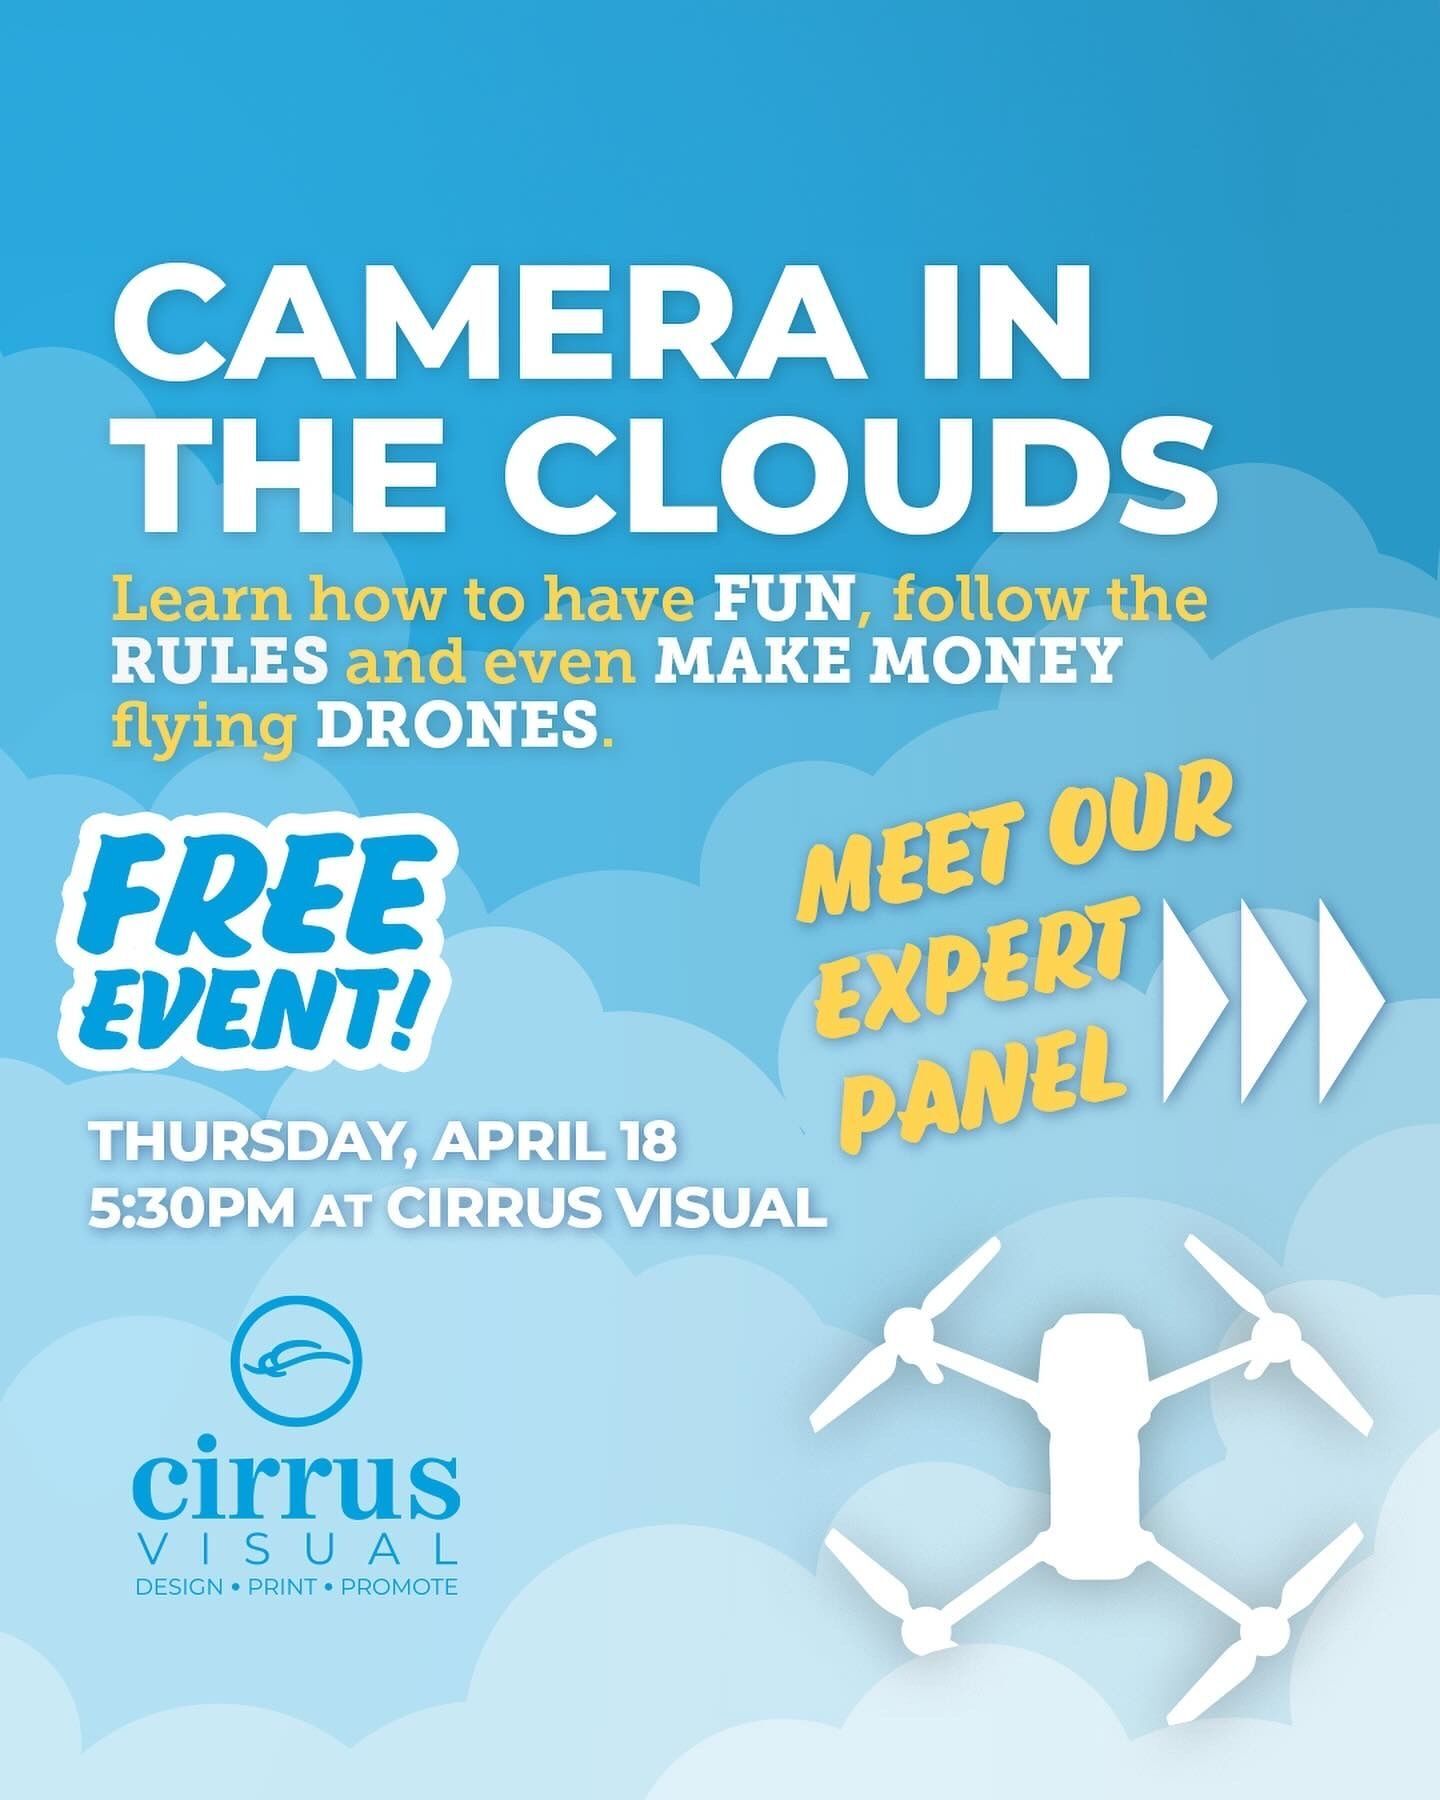 “CAMERA in the CLOUDS” Drone Basics Panel Discussion